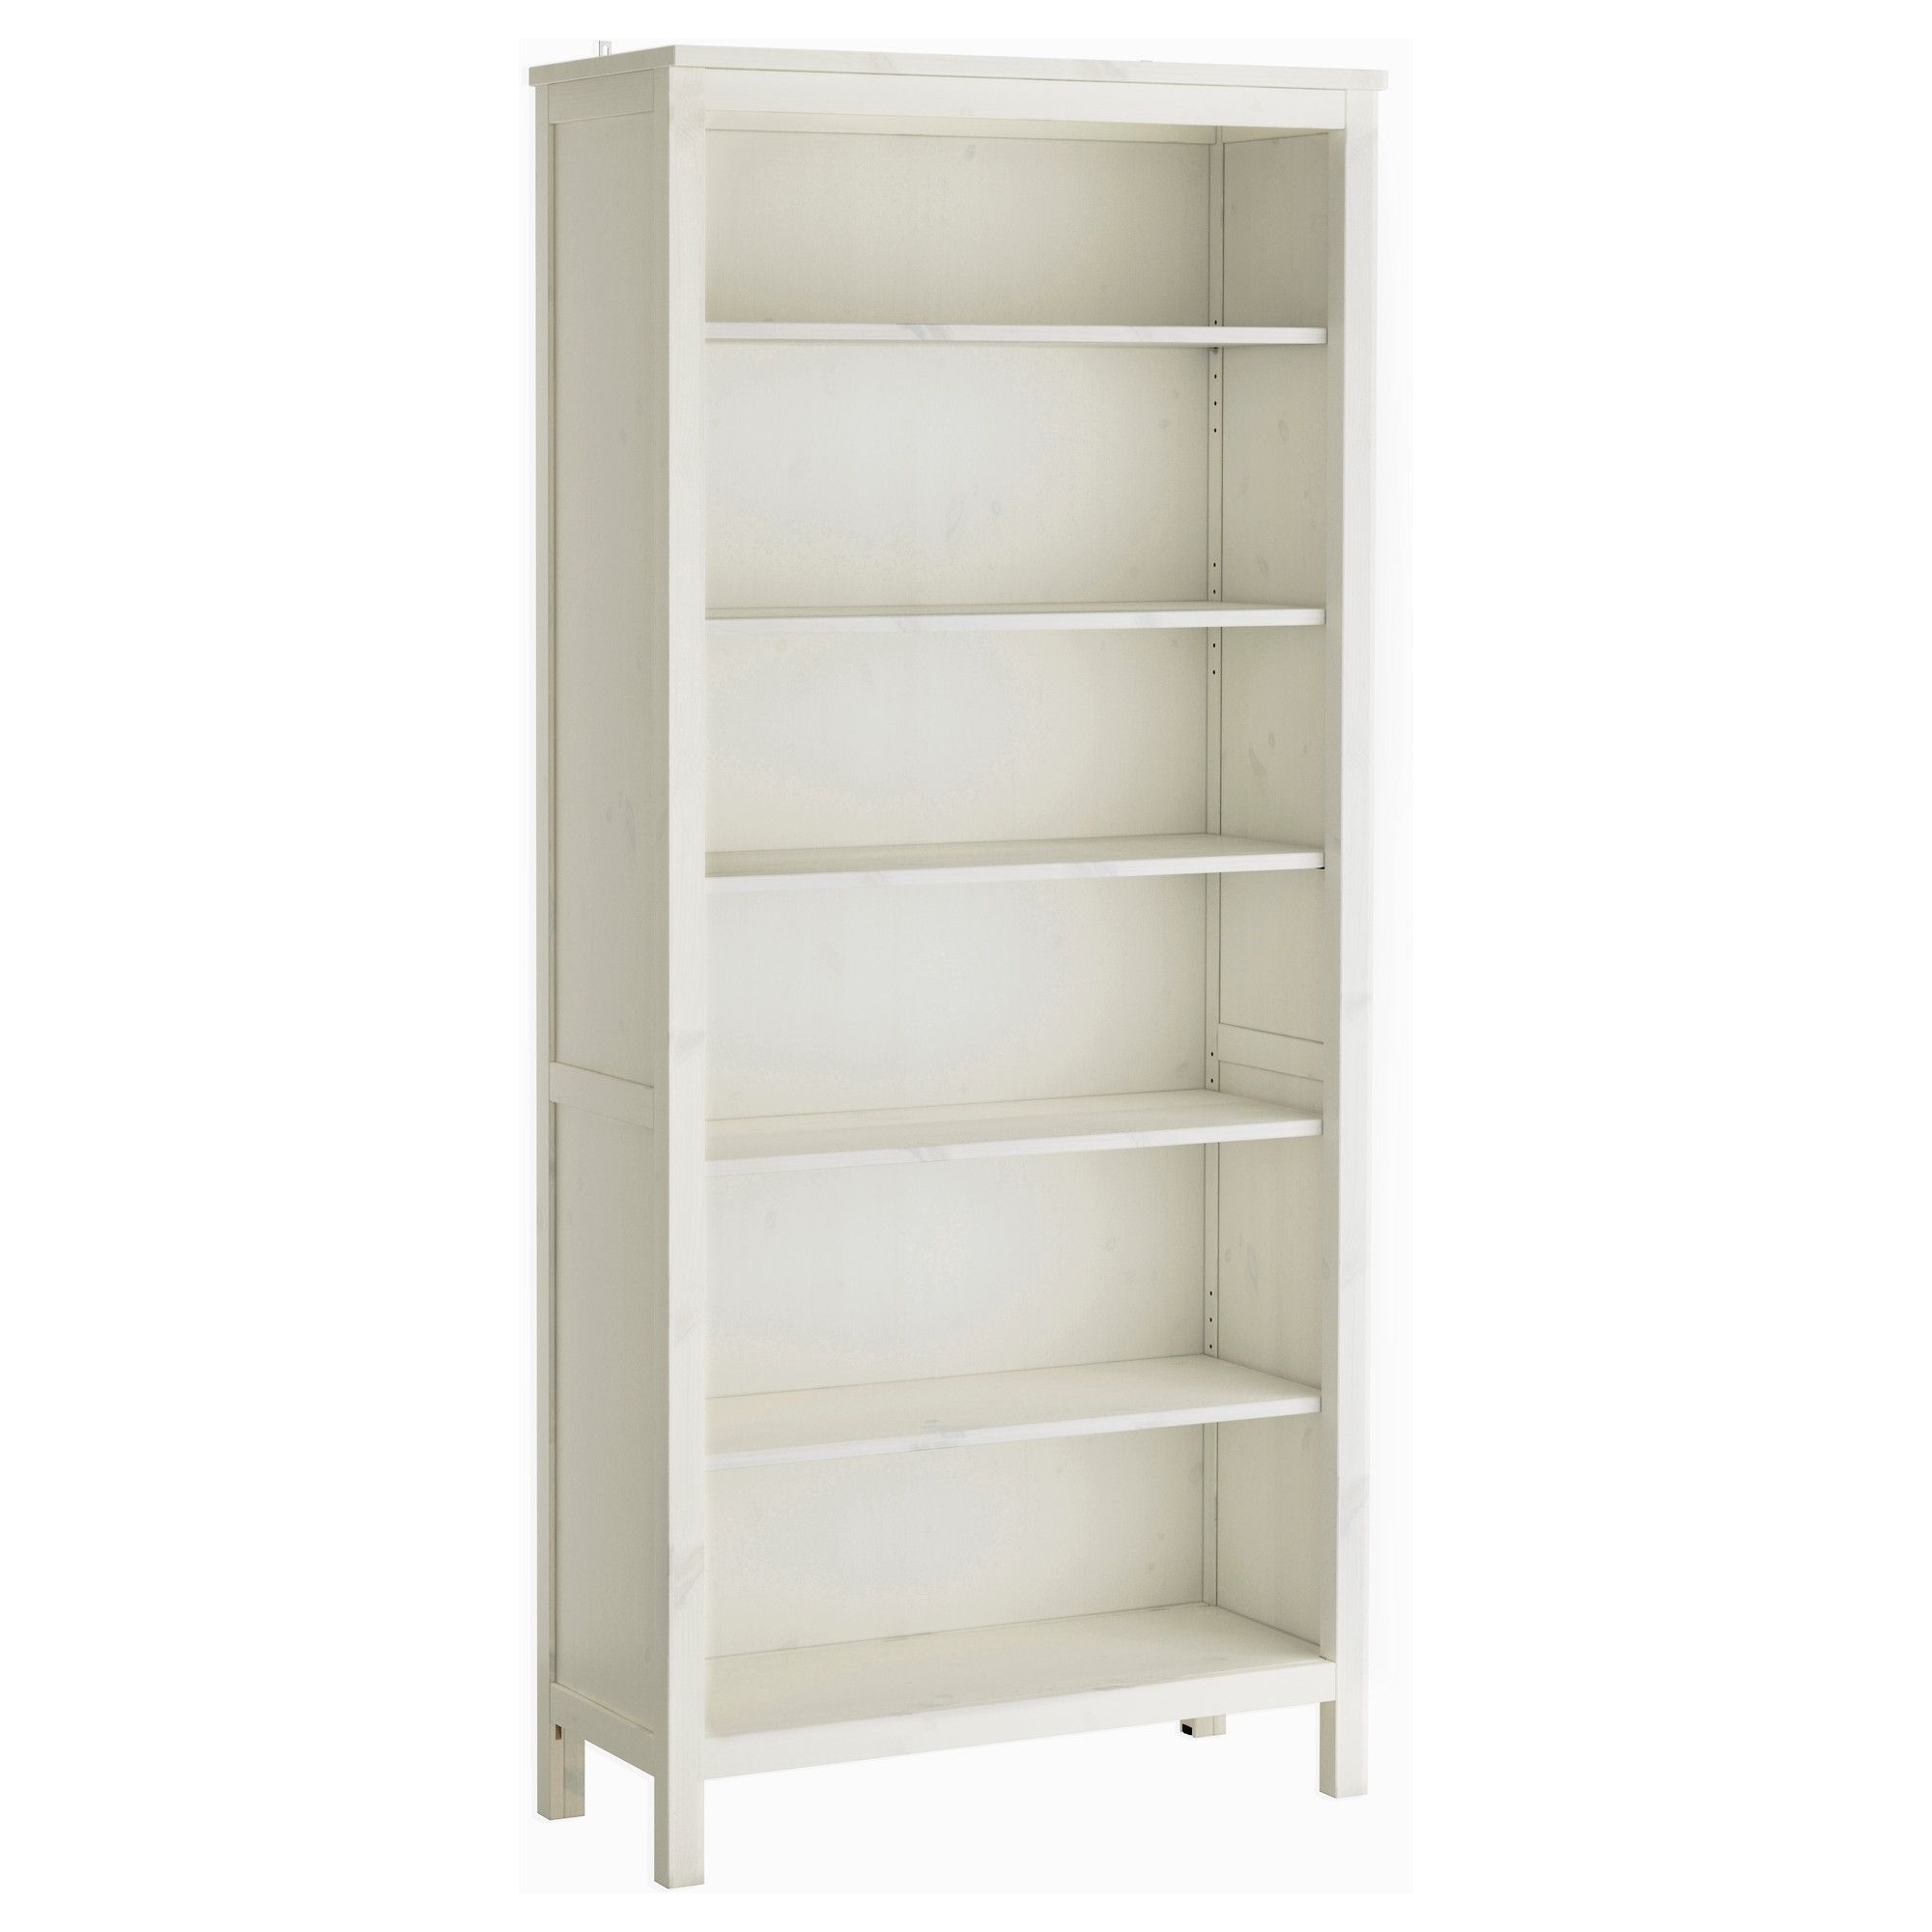 Most Popular Ikea White Bookcases Pertaining To Hemnes Bookcase – White Stain – Ikea (View 4 of 15)